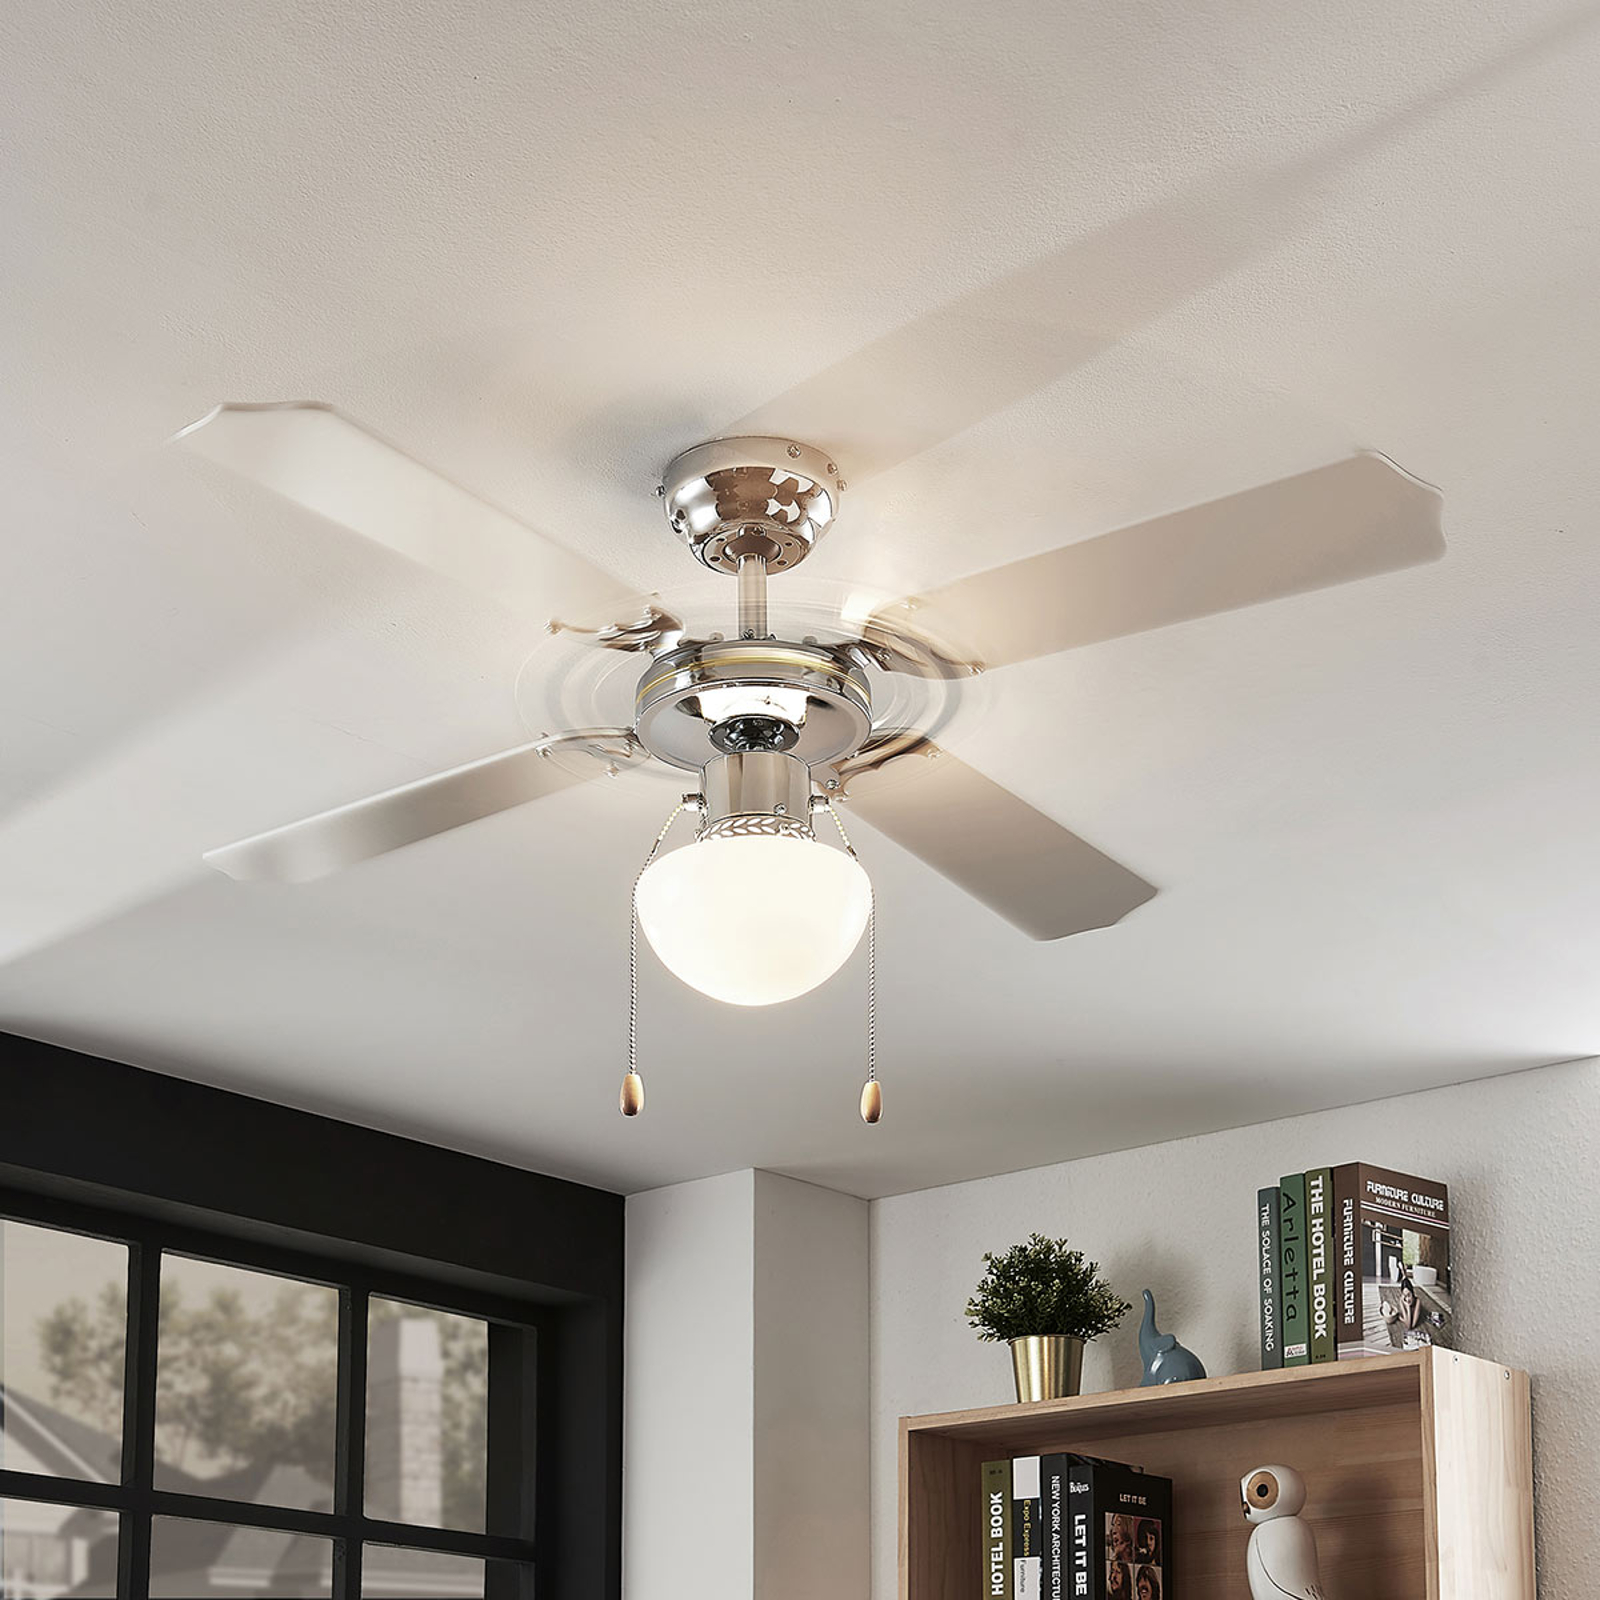 joulin-ceiling-fan-with-light-black-and-white